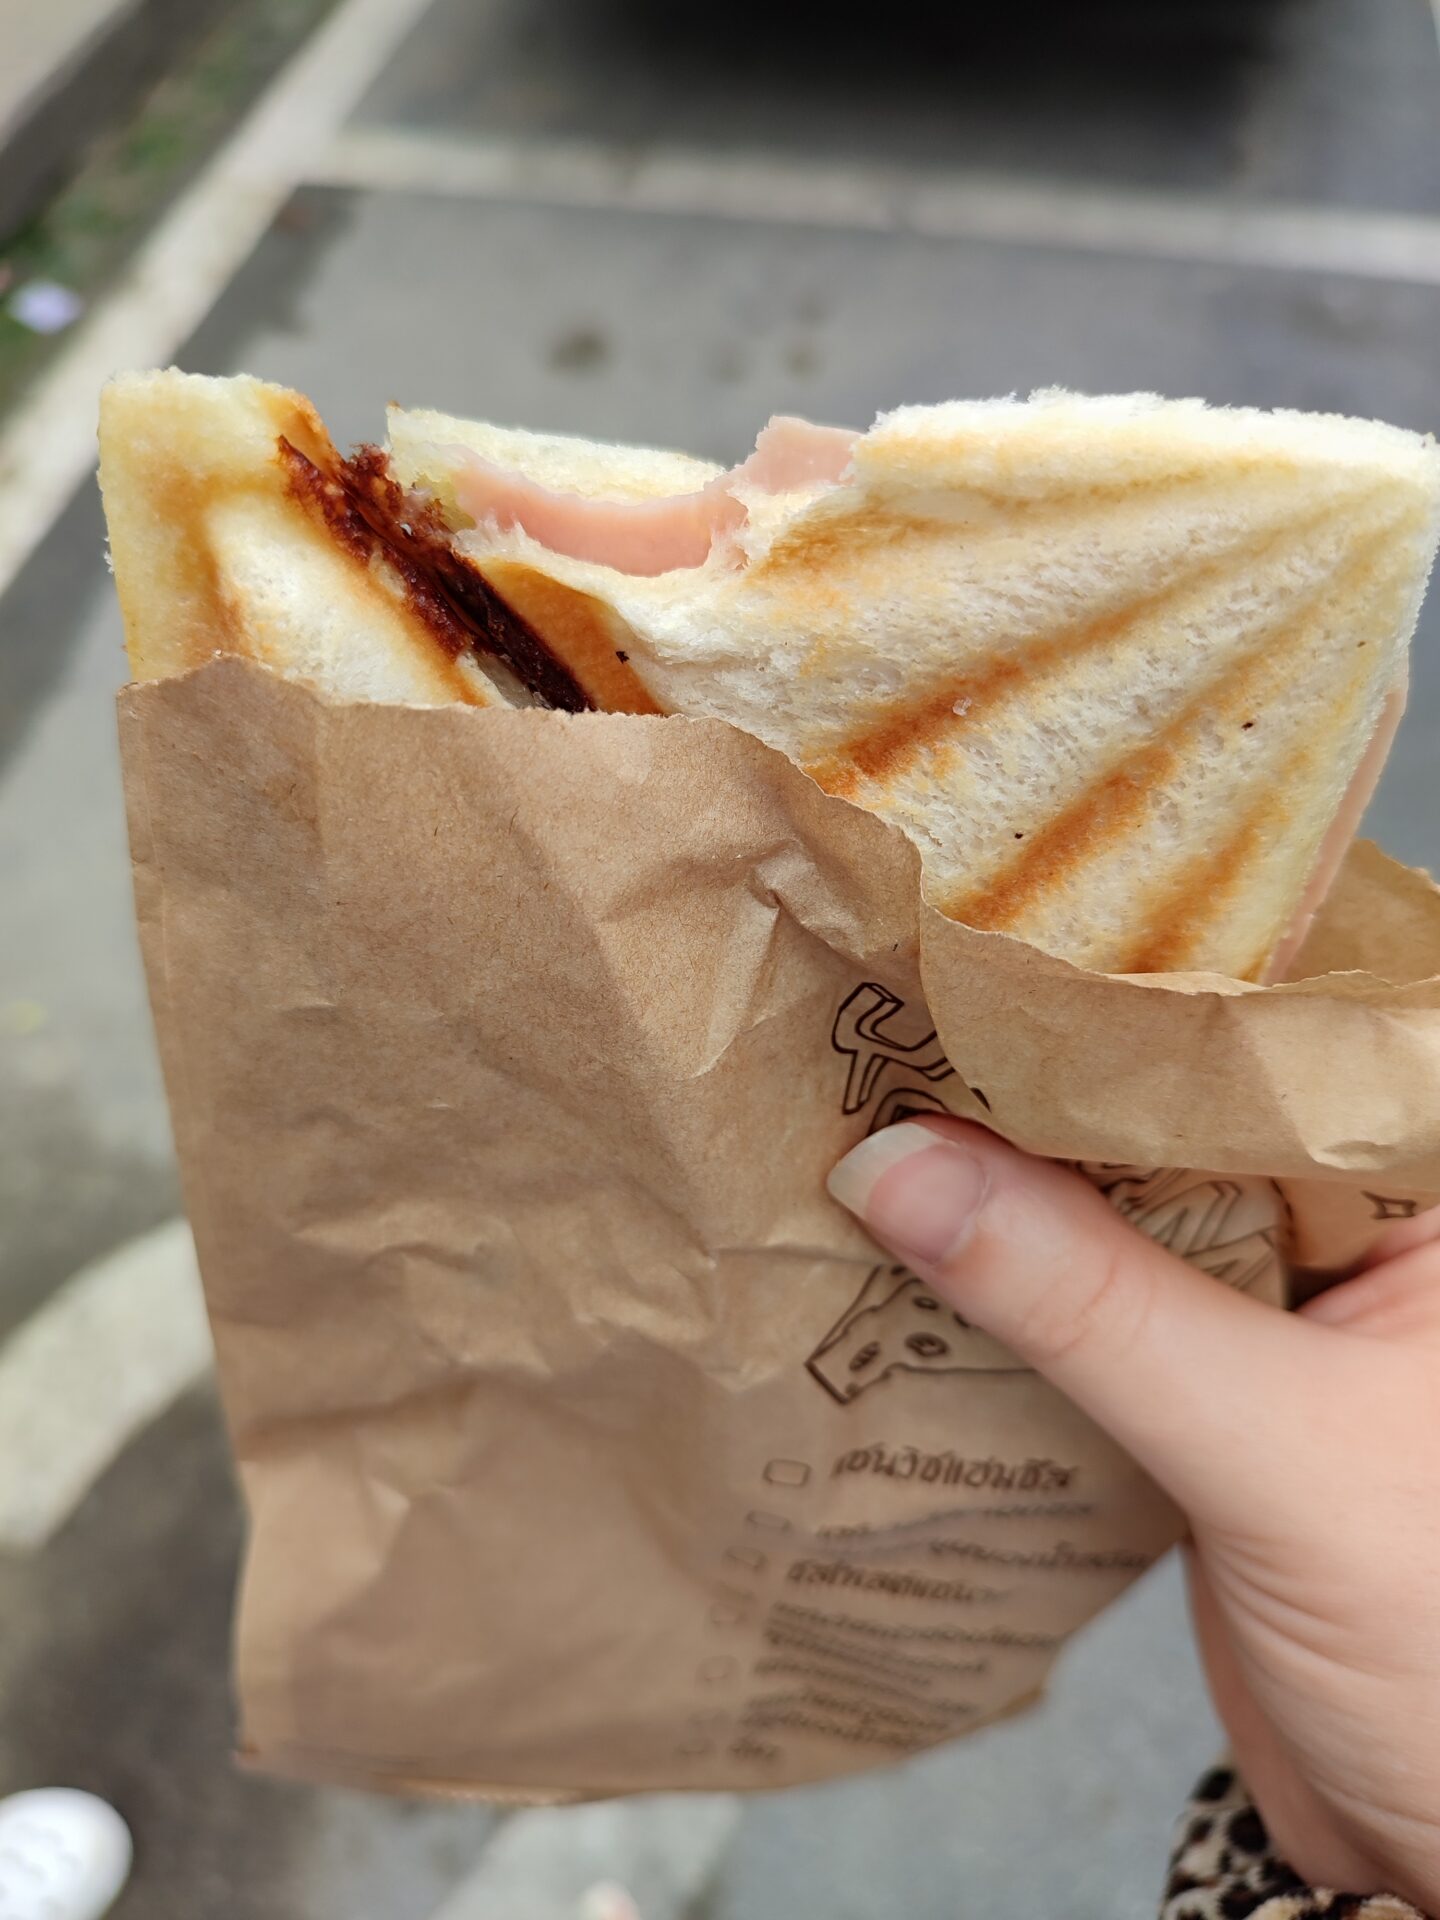 cheese and ham toastie from 7/11. cost of 5 nights in Bangkok